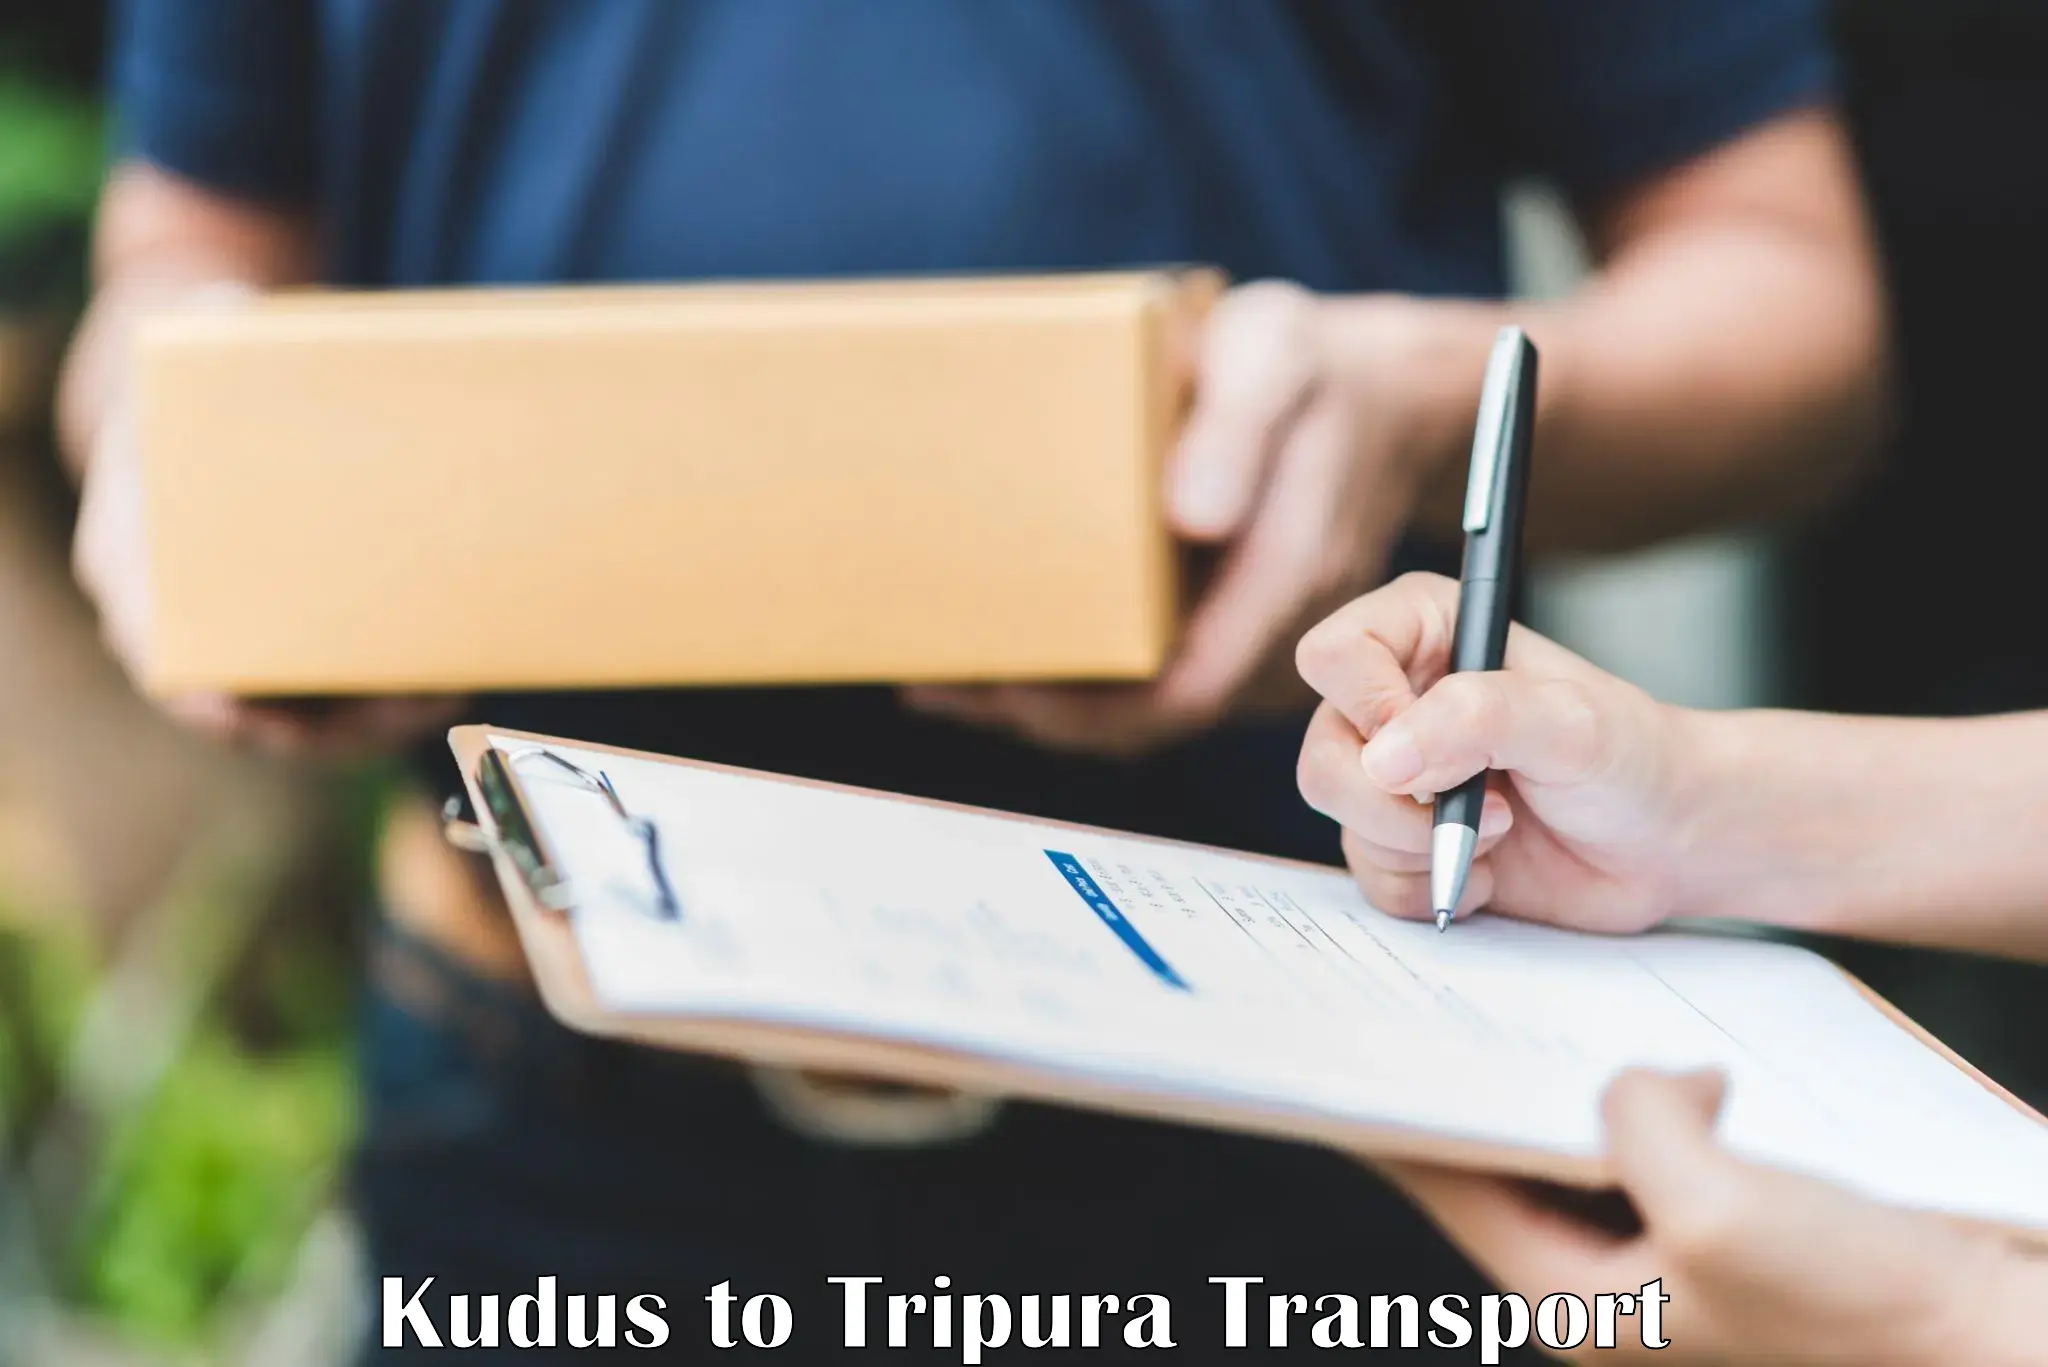 Transport in sharing in Kudus to South Tripura